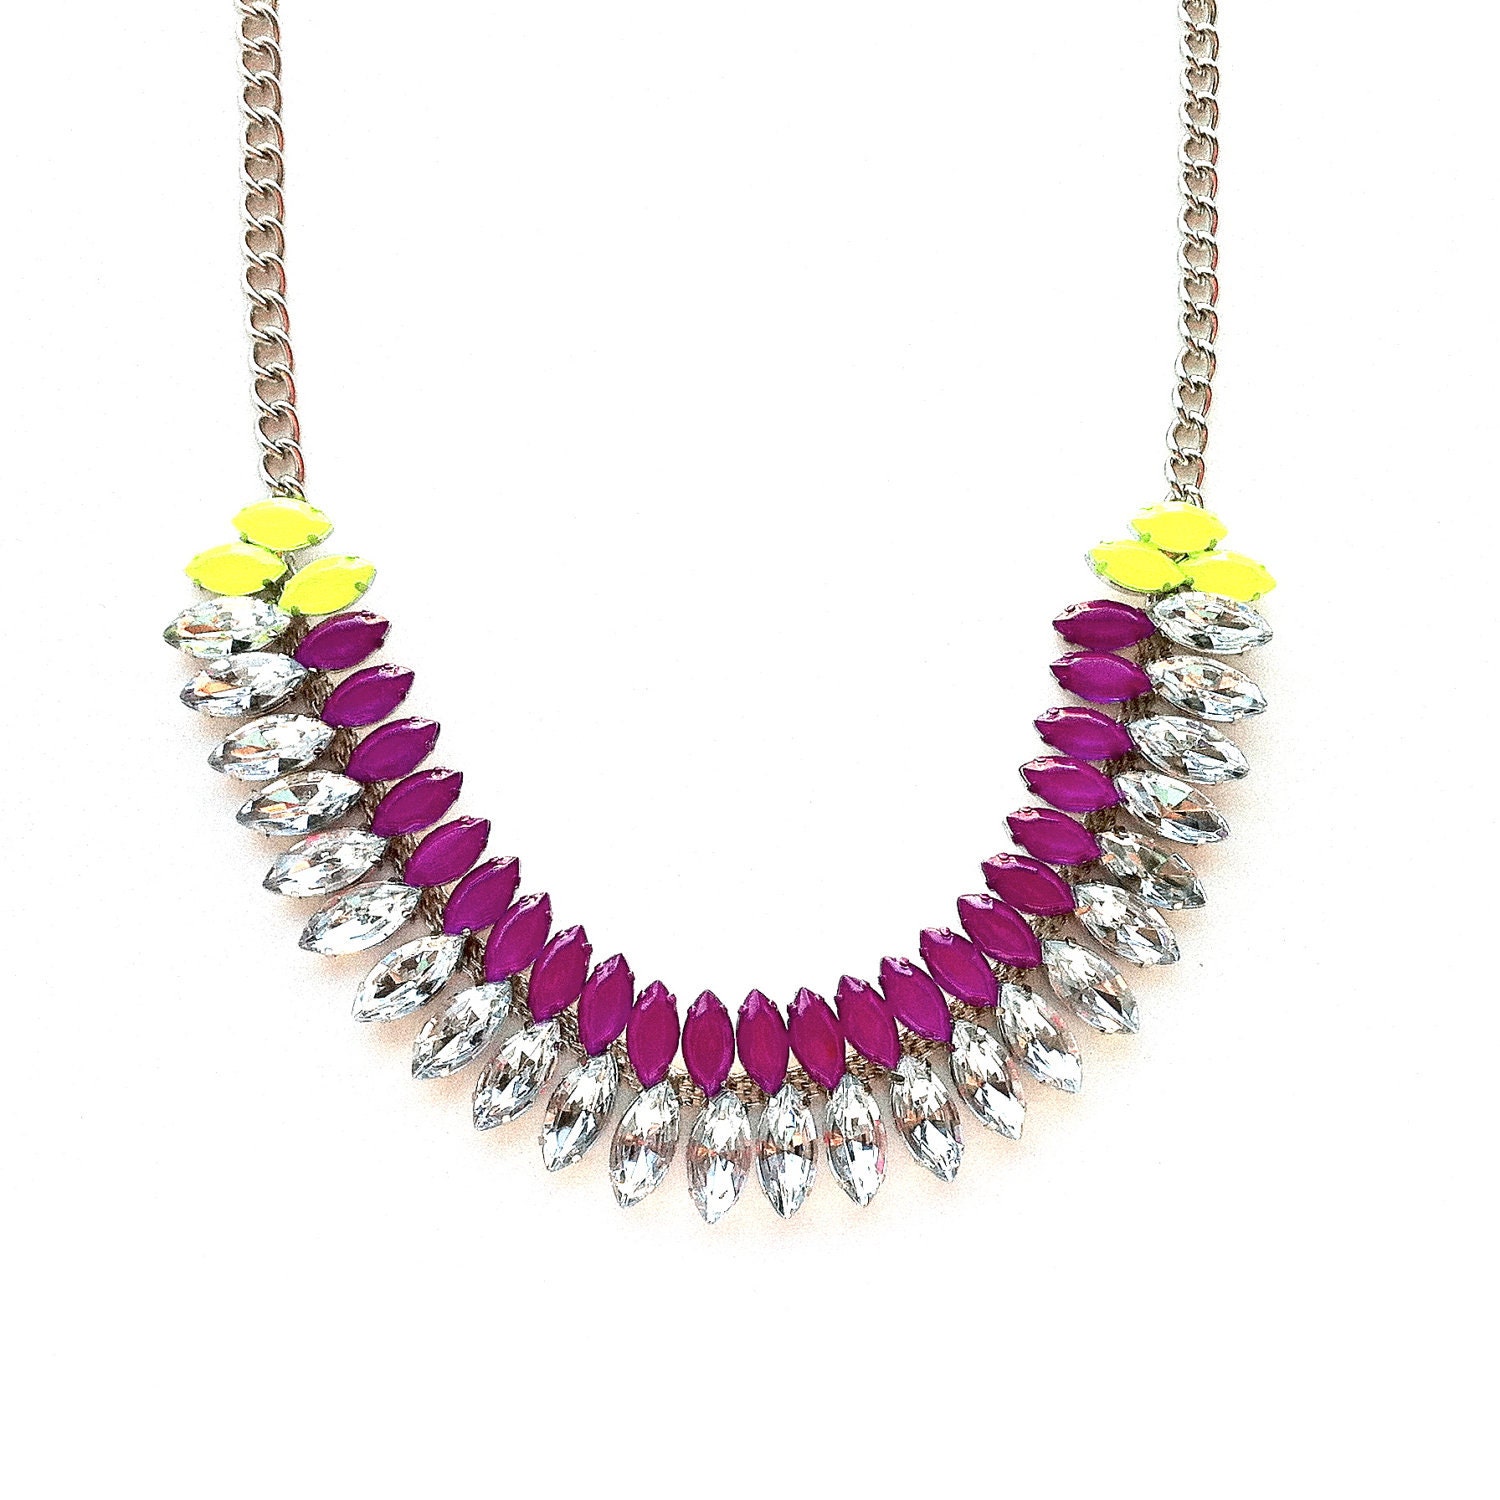 Neon Purple and Neon Yellow Hand-painted Crystal Necklace